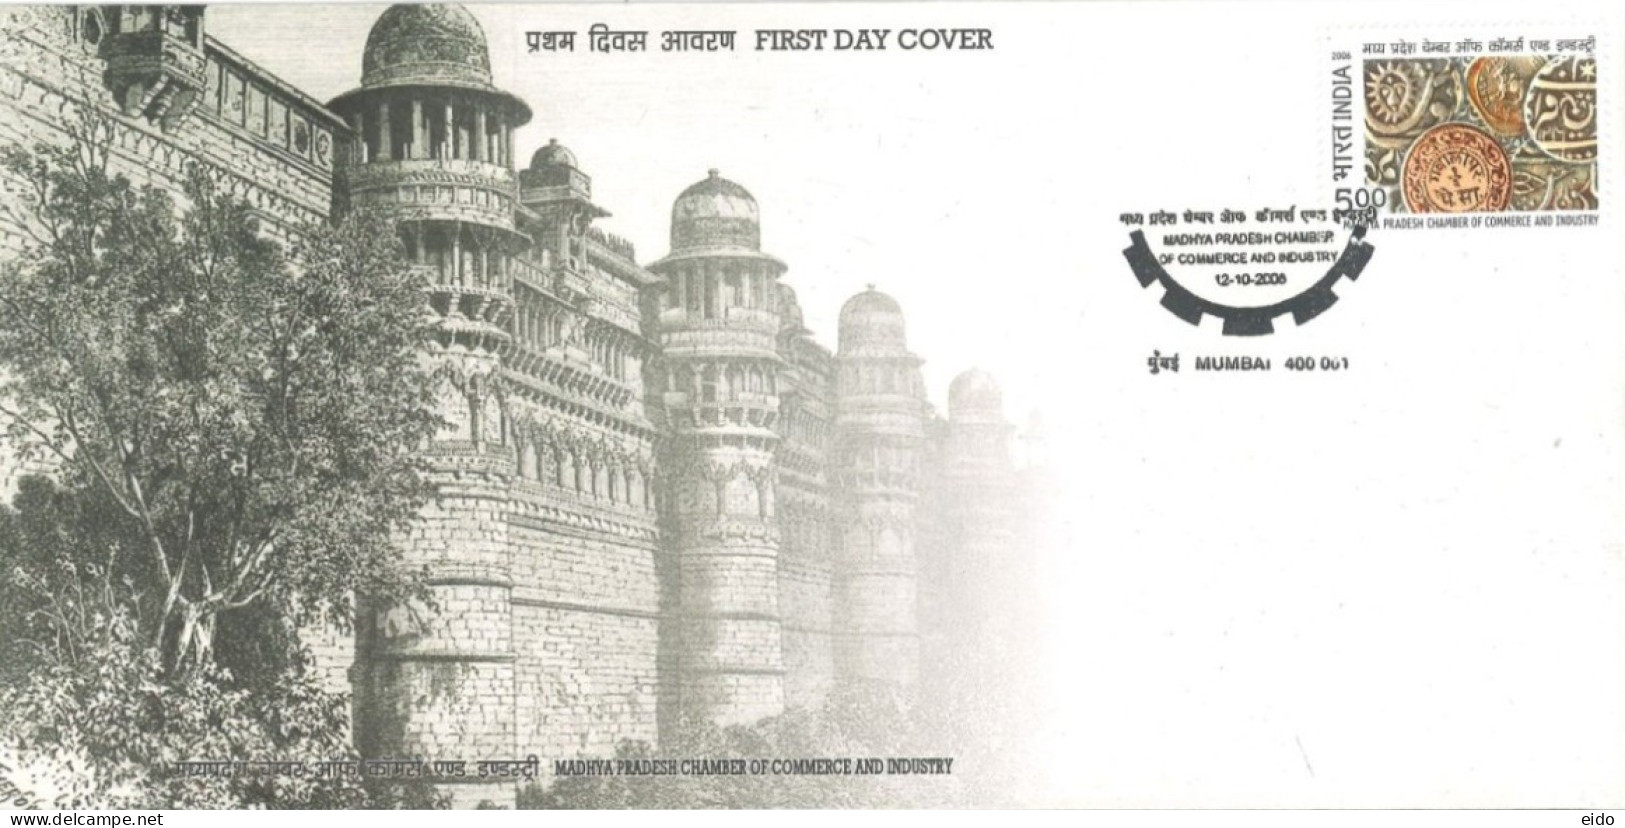 INDIA - 2006 - FDC STAMP OF MADHYA PRADESH CHAMBER OF COMMERCE AND INDUSTRY. - Briefe U. Dokumente